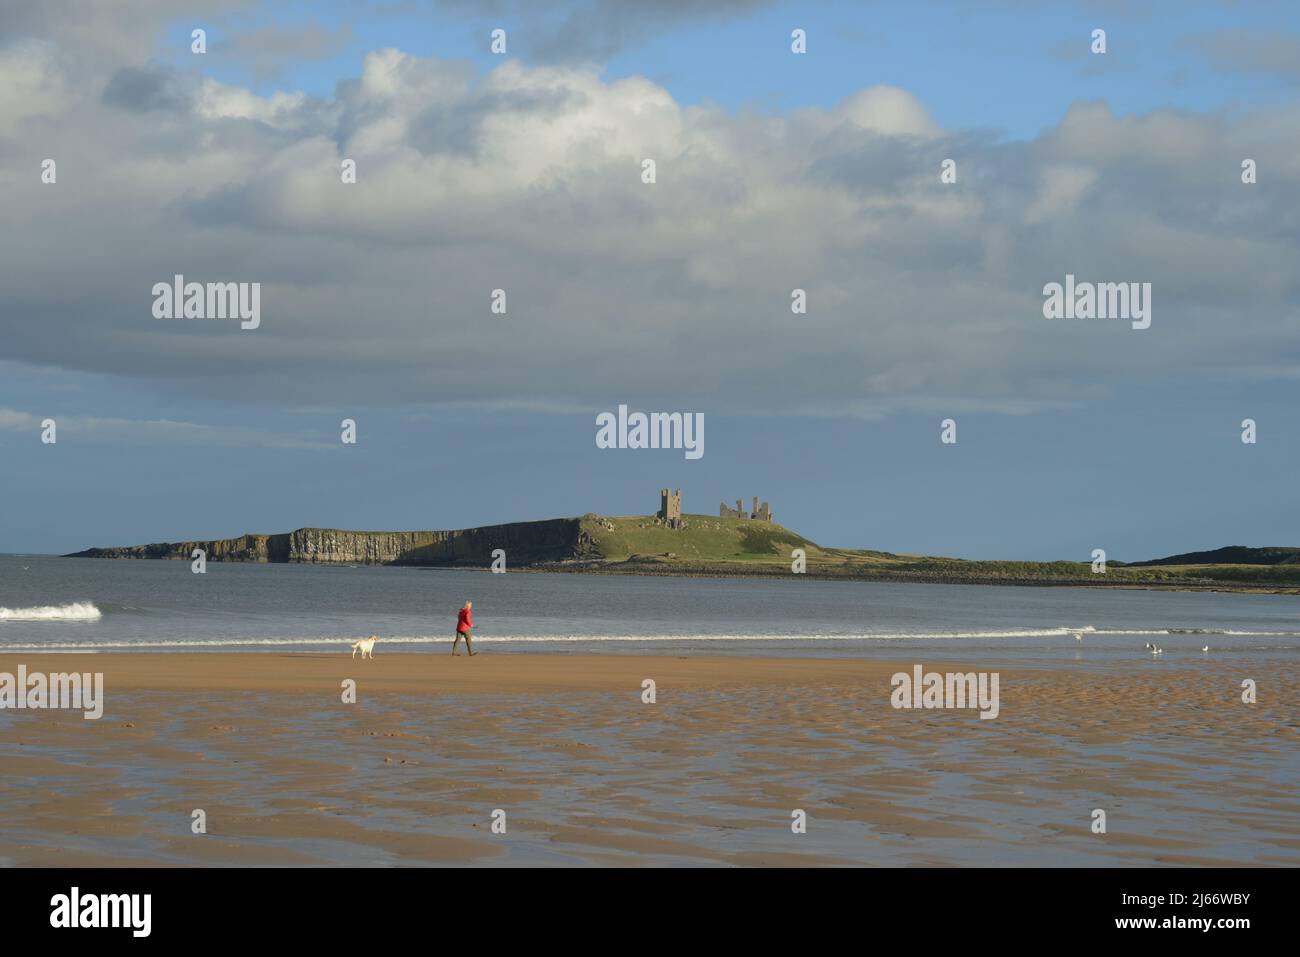 Landscape image of Dunstanburgh castle catching late afternoon light overlooking the beach near Embleton with a single figure wearing red with dog Stock Photo